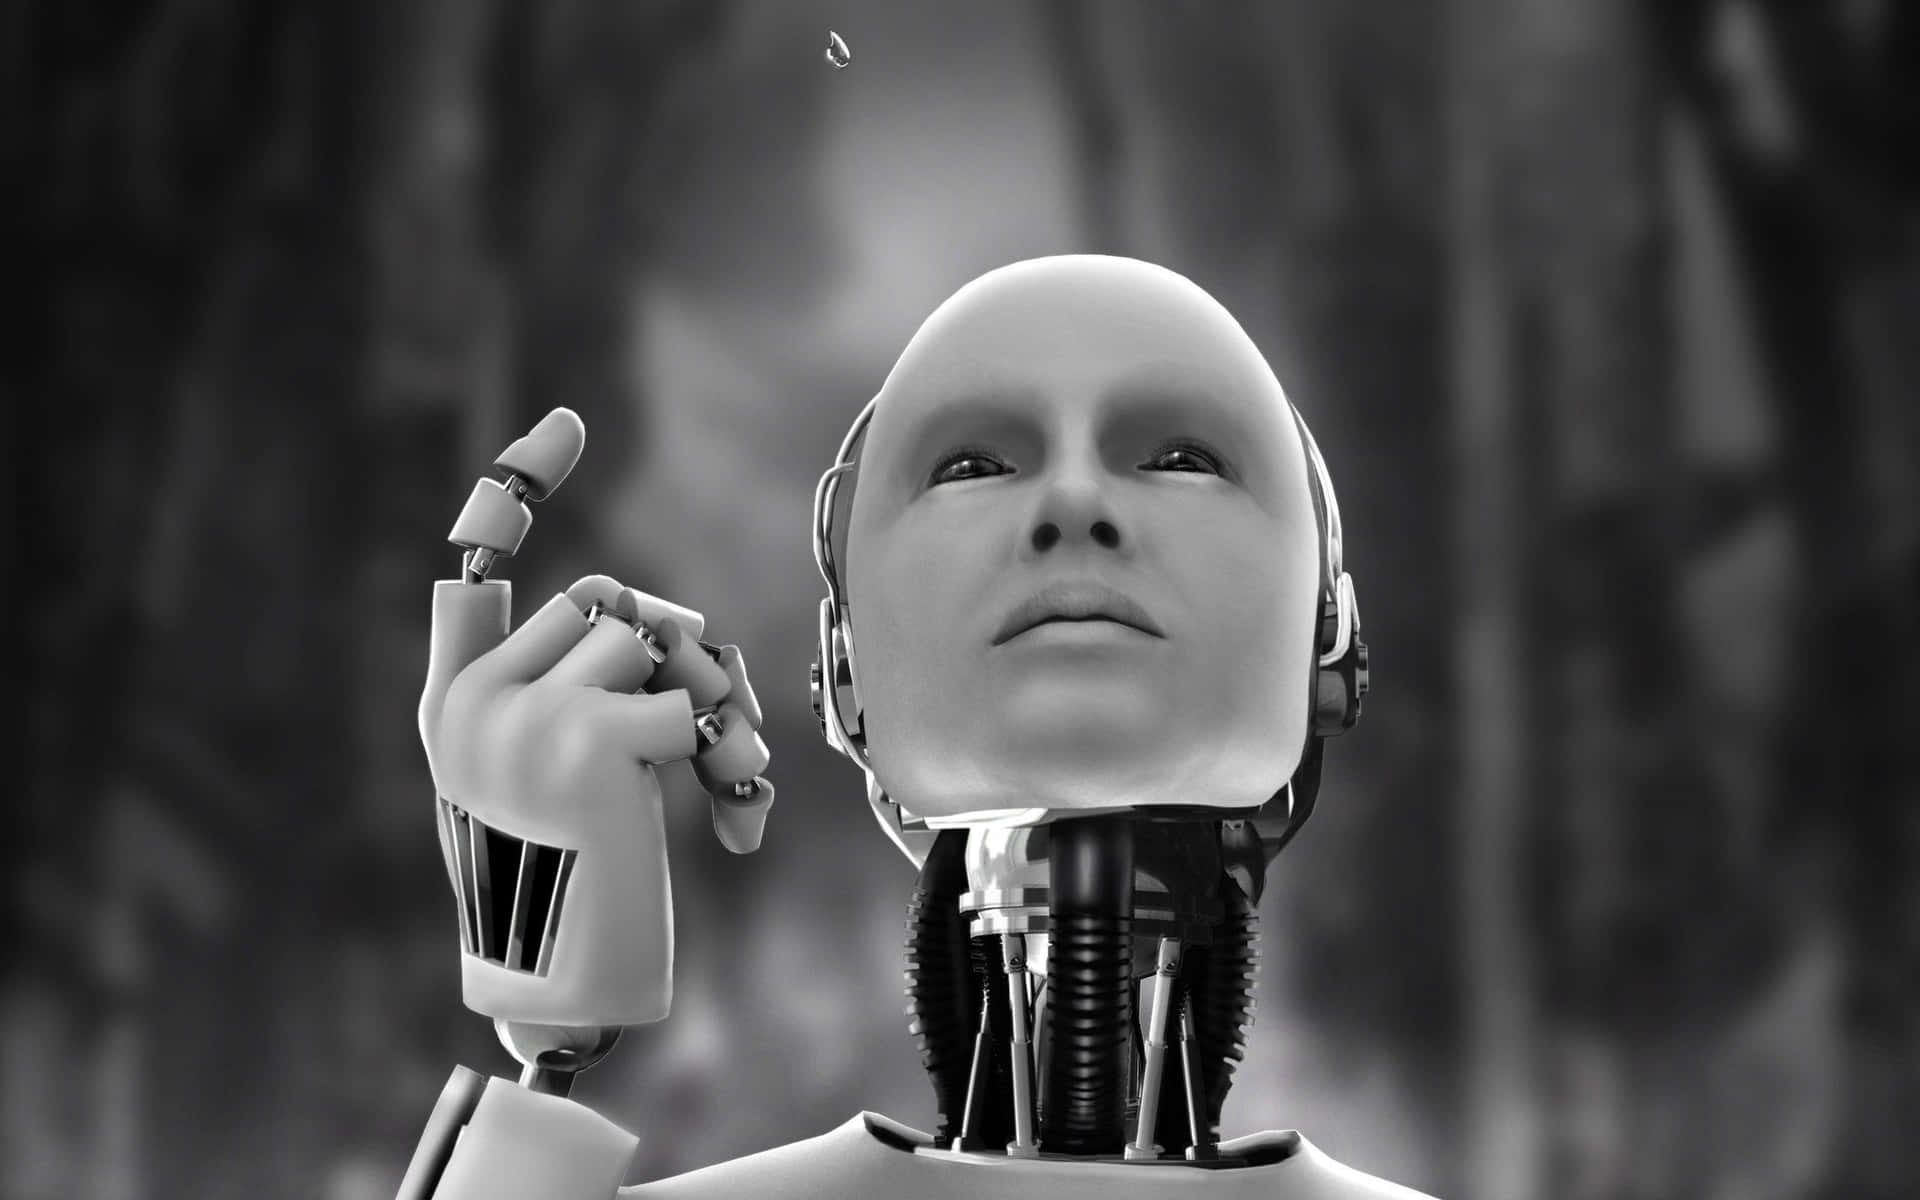 Futuristic humanoid and Artificial Intelligence Wallpaper